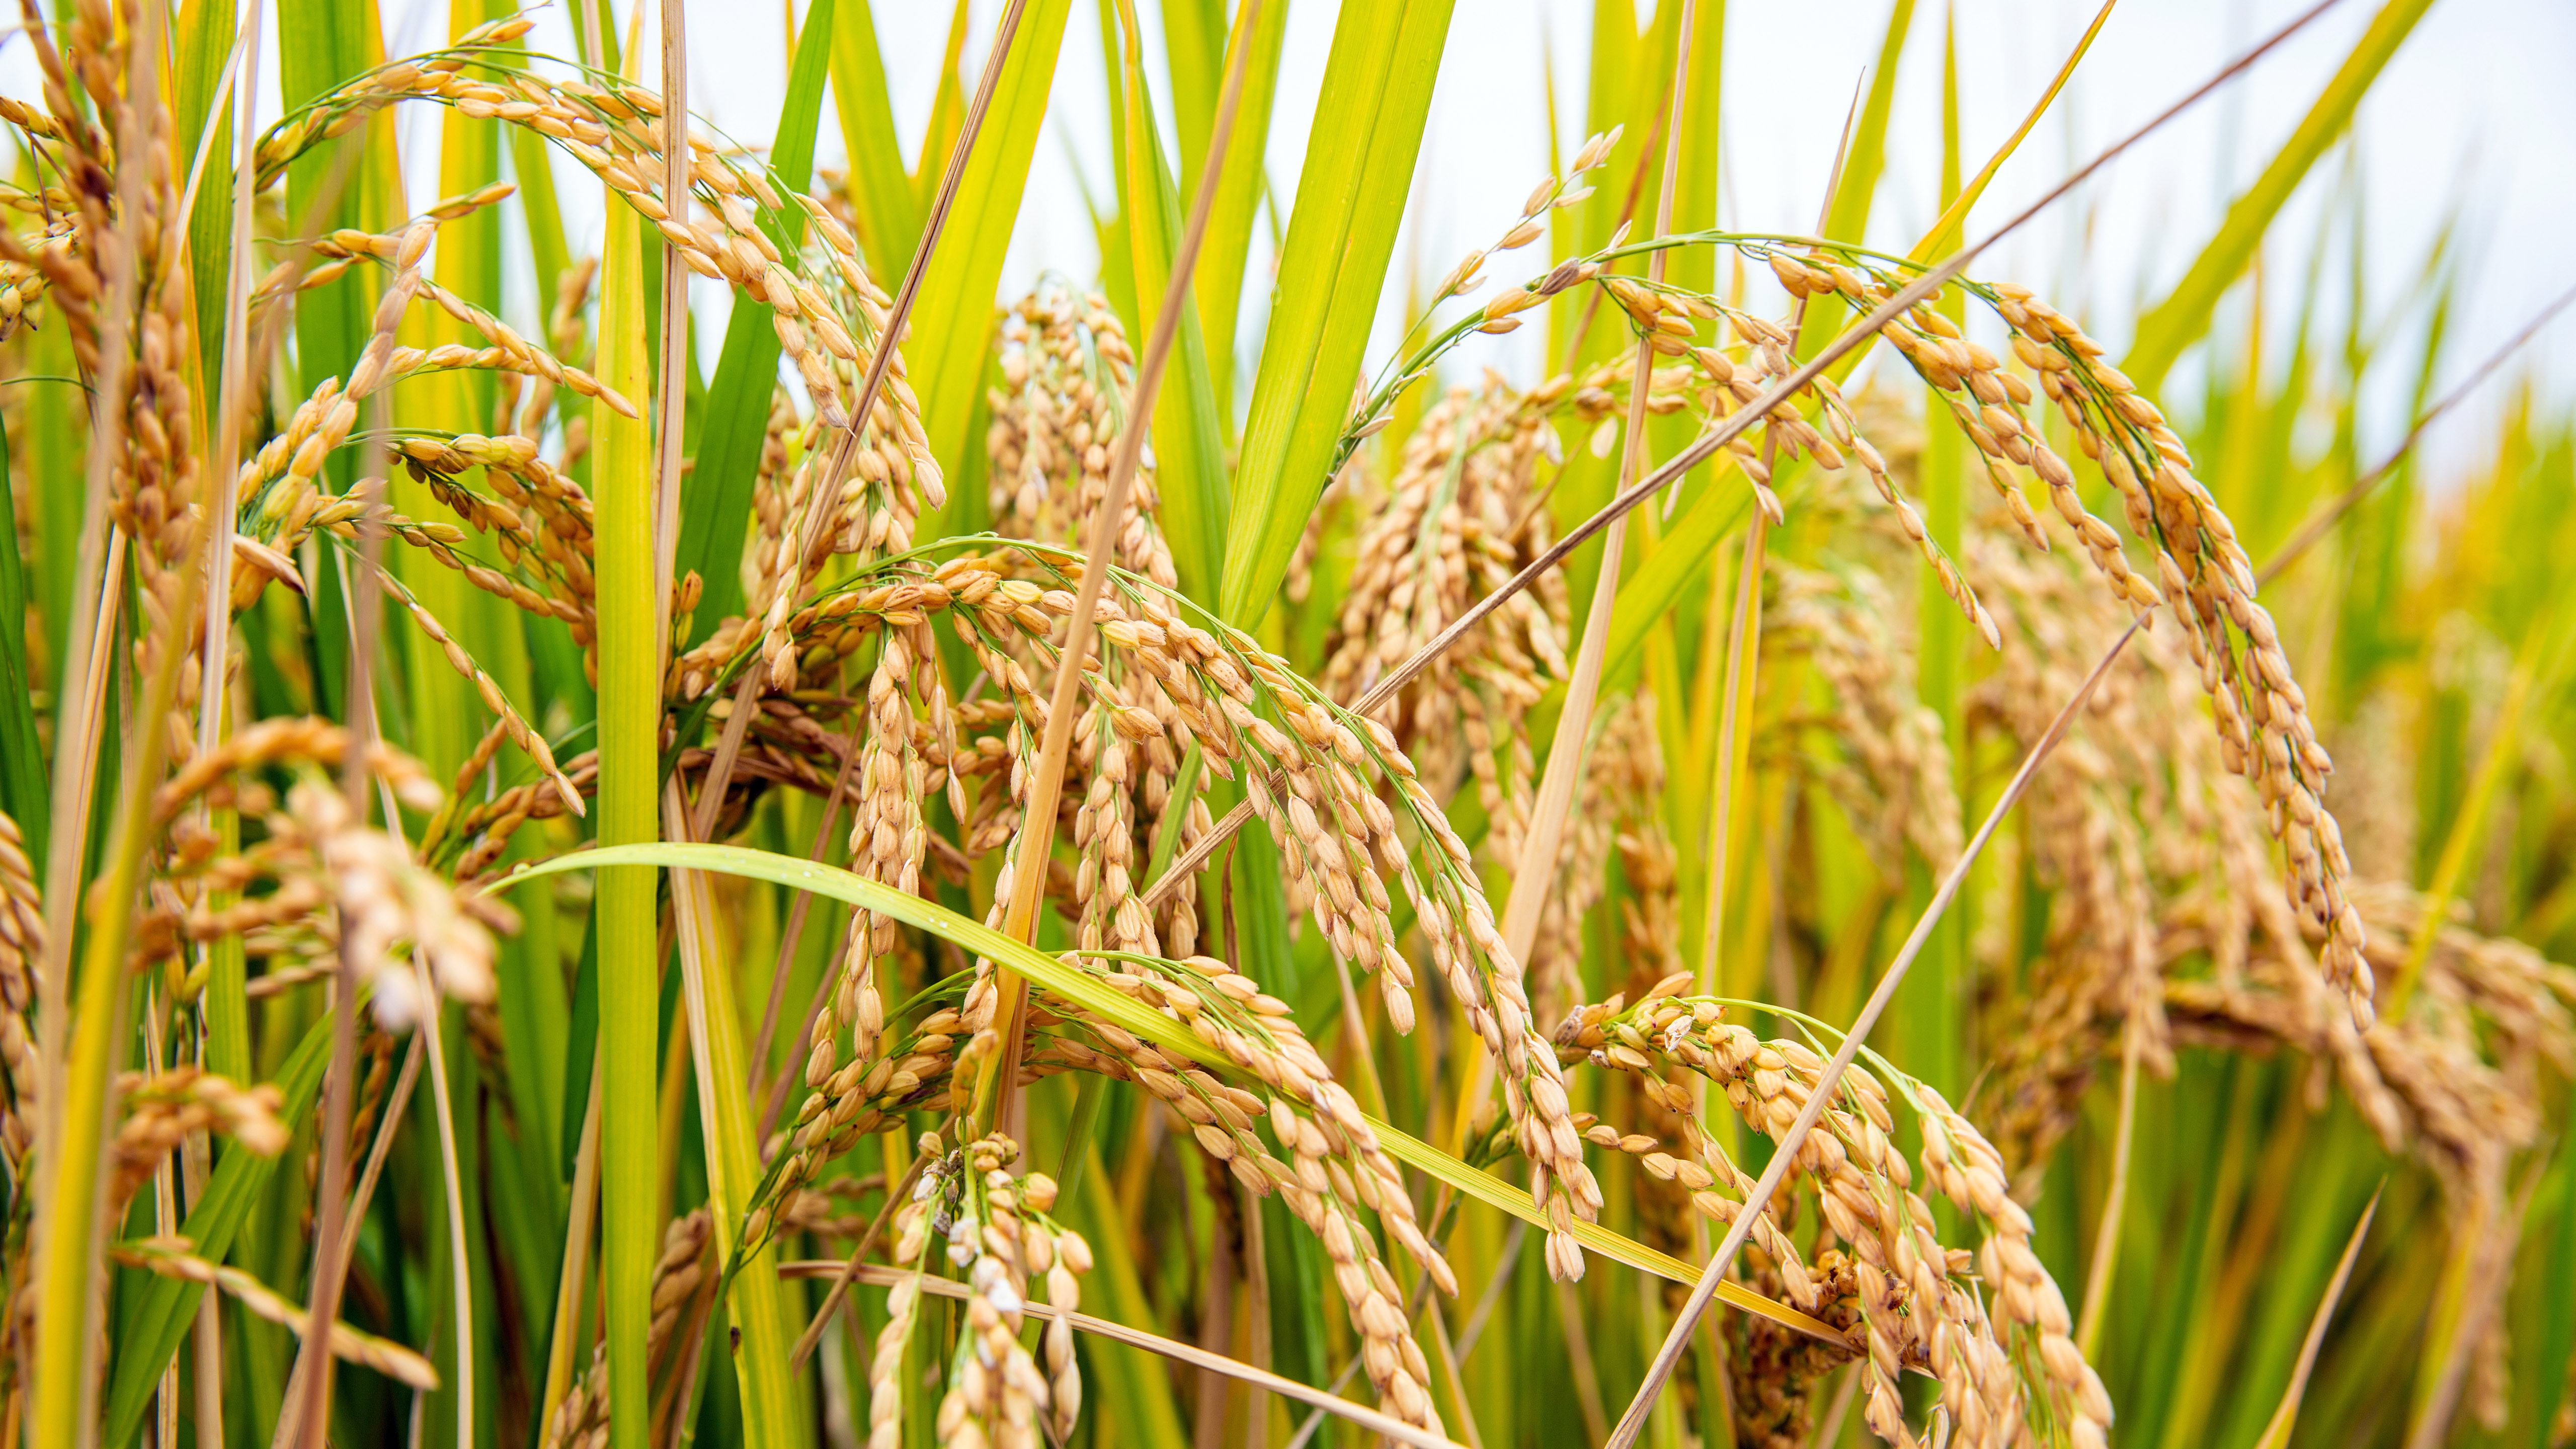 General 5120x2880 rice food plants nature